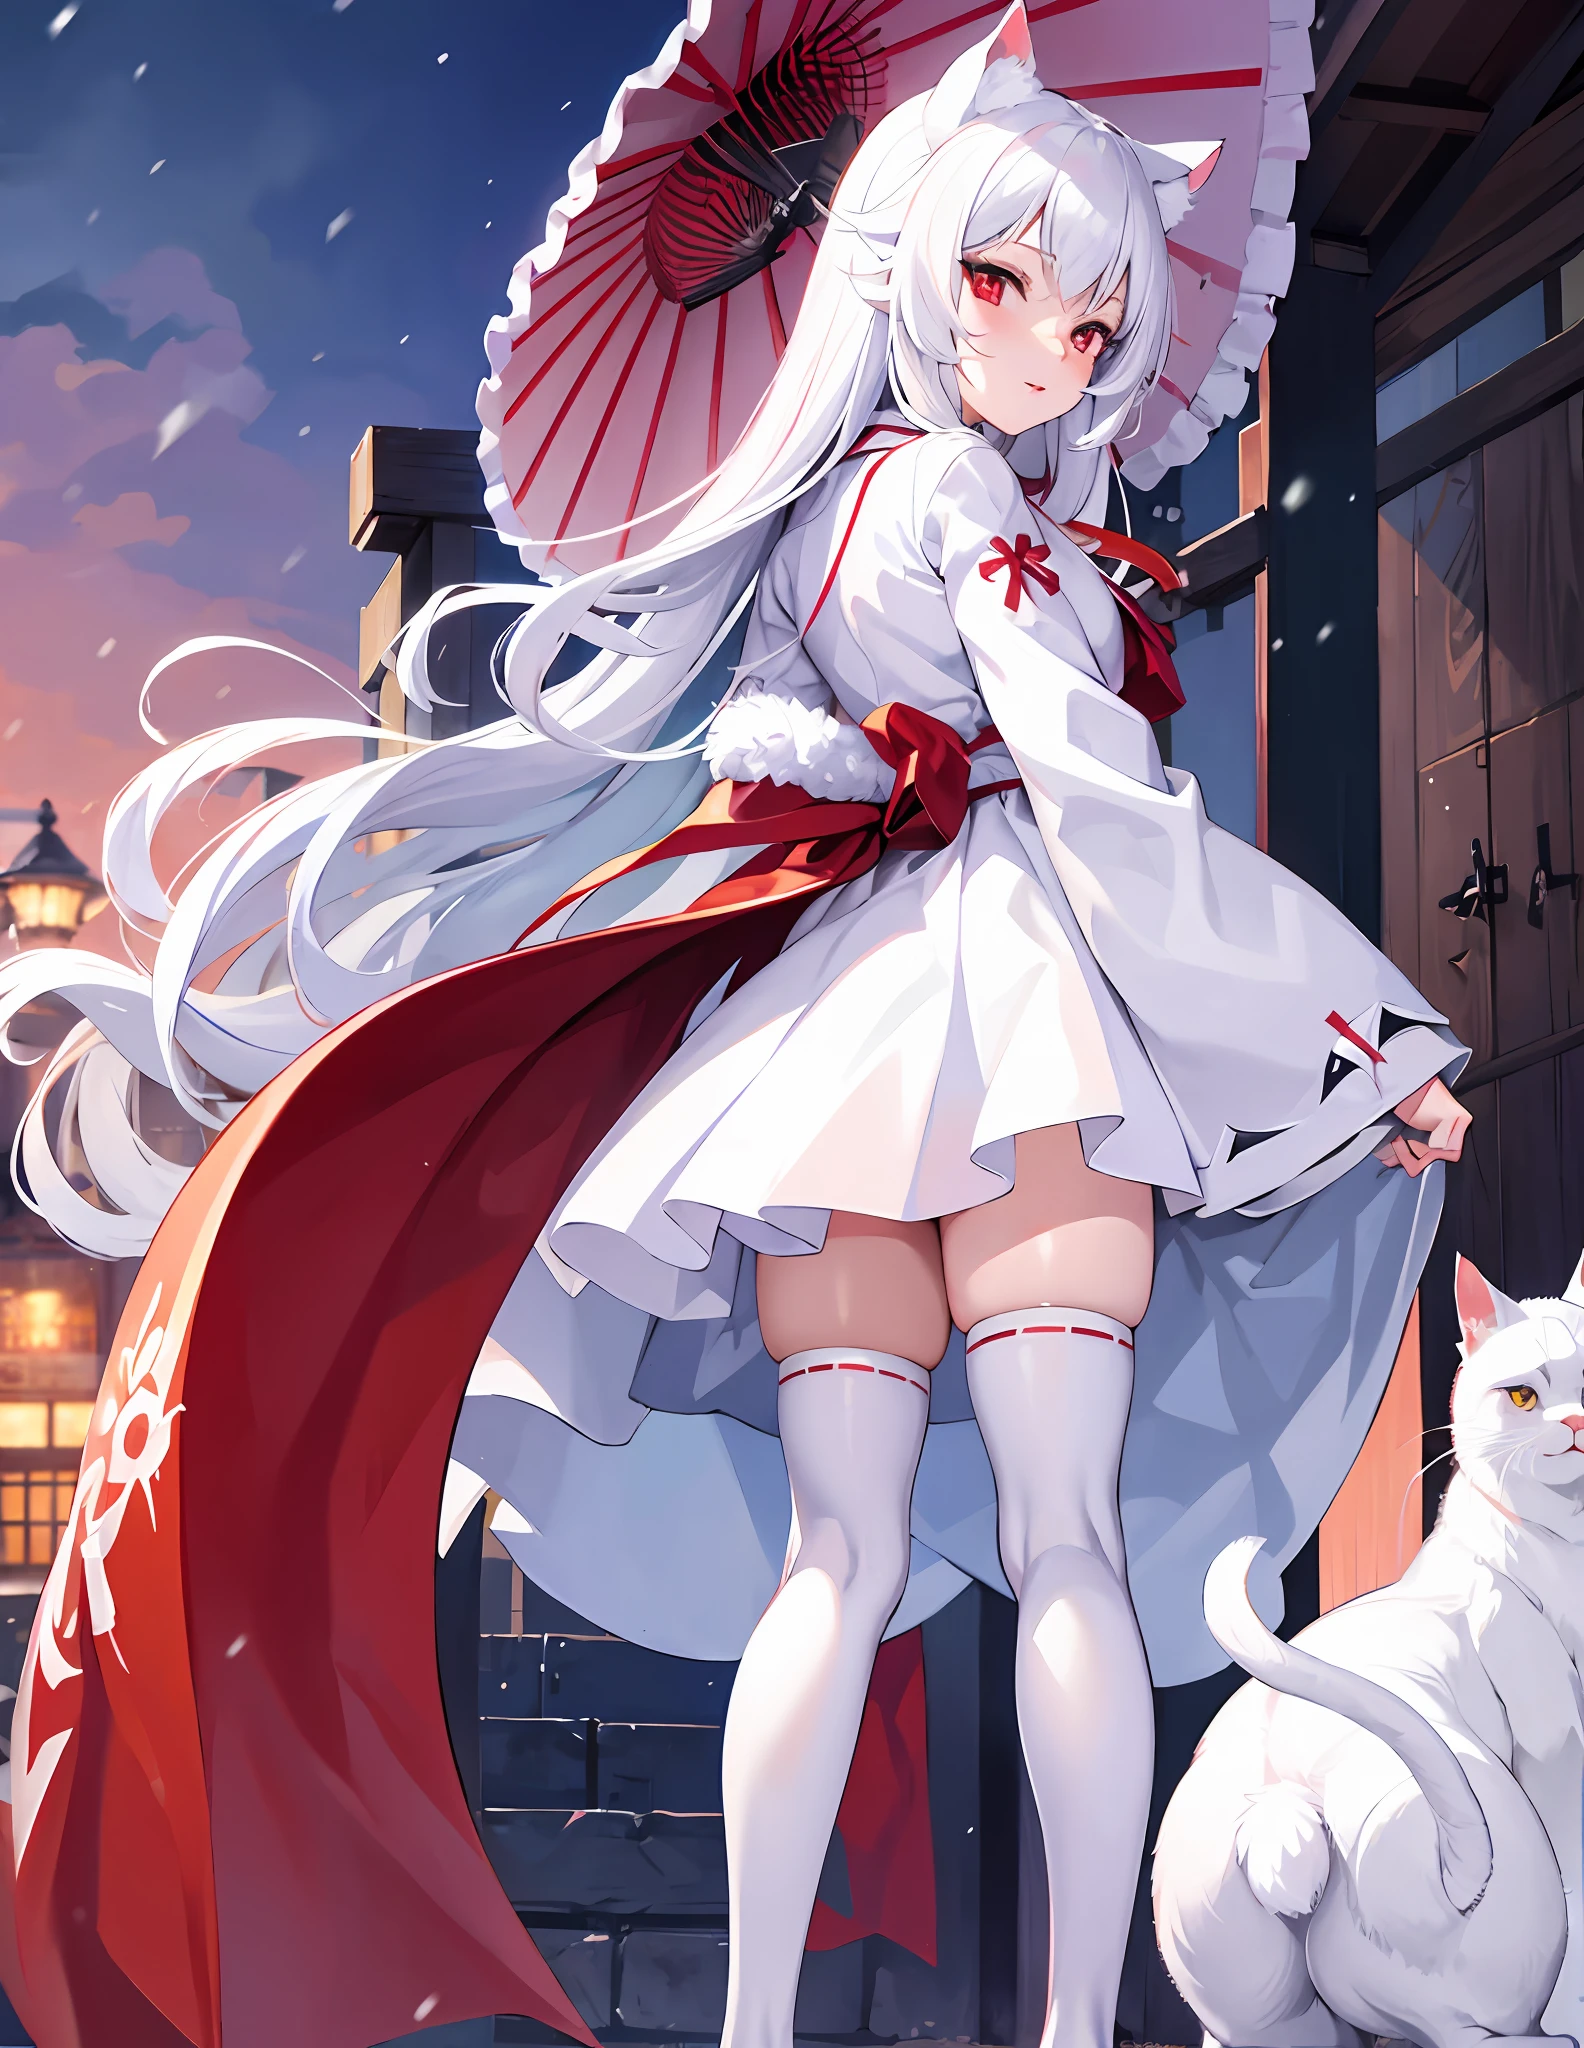 White hair, anime, shoujo, shrine, white cat ears, red witch costume, snow, red umbrella, red eyes, snow, white stockings